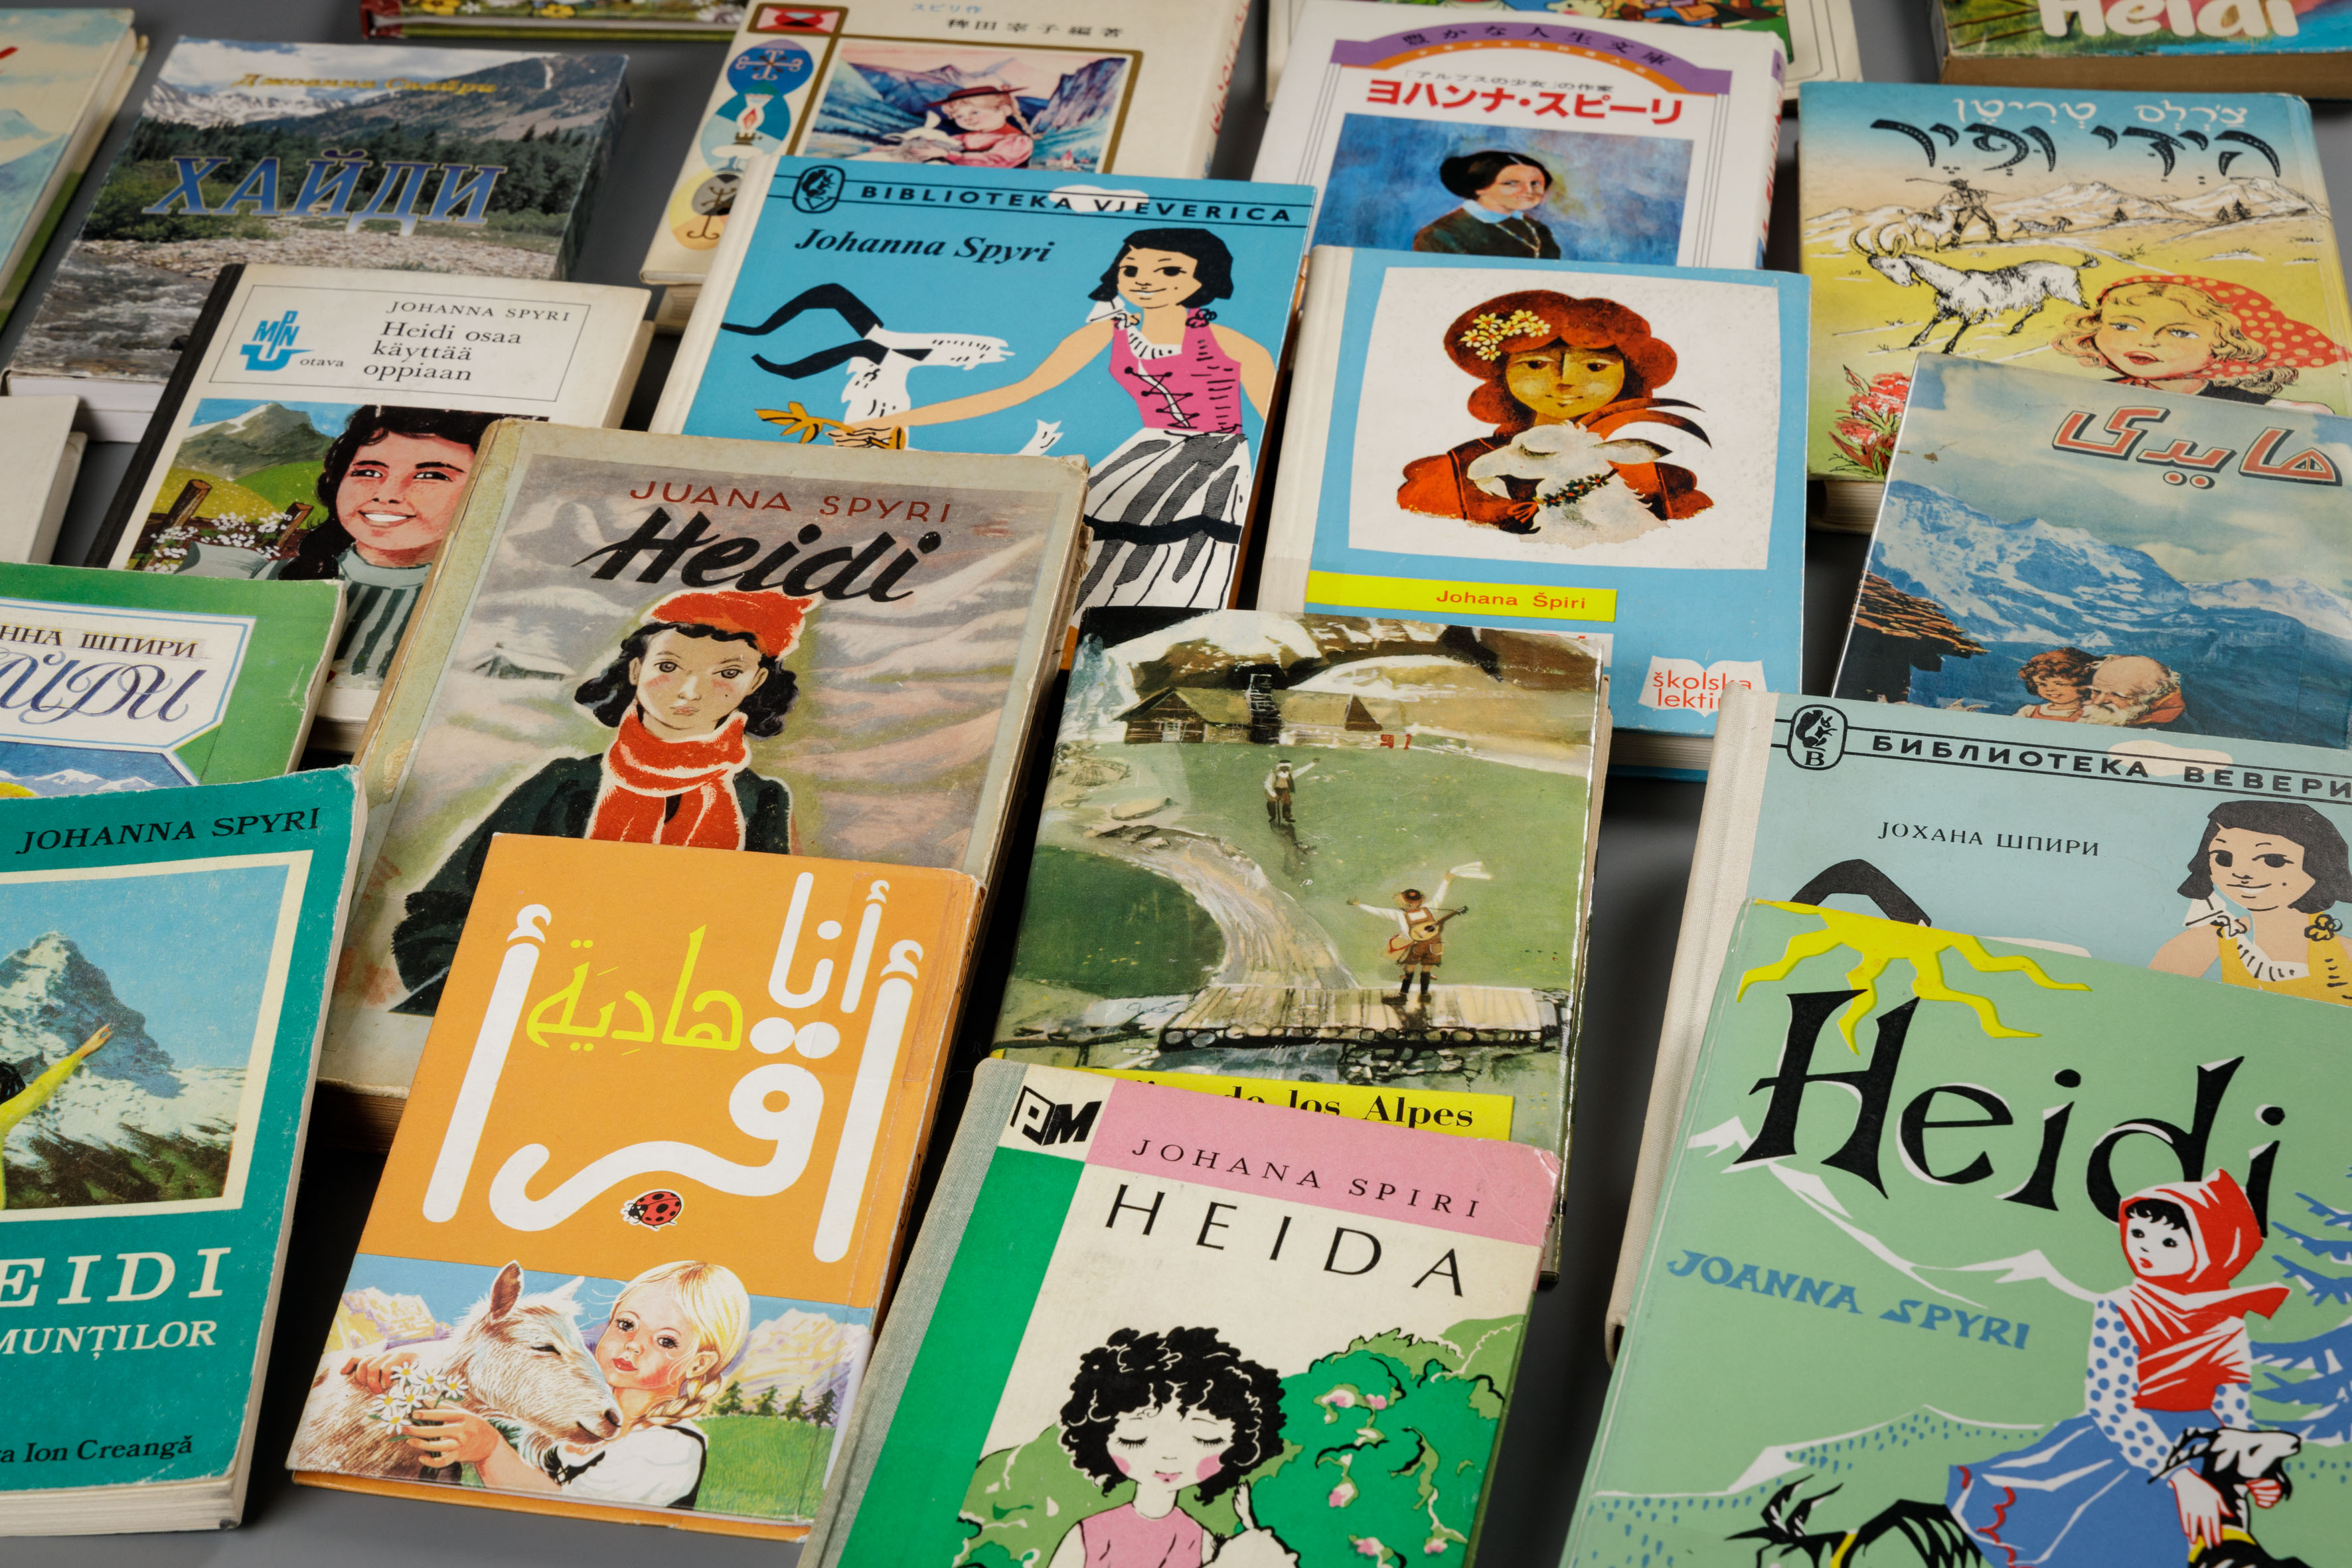 The Johanna Spyri Archive collection contains over 600 foreign-language "Heidi" editions in more than 40 languages. SIKJM. (Image: Naomi Wenger)